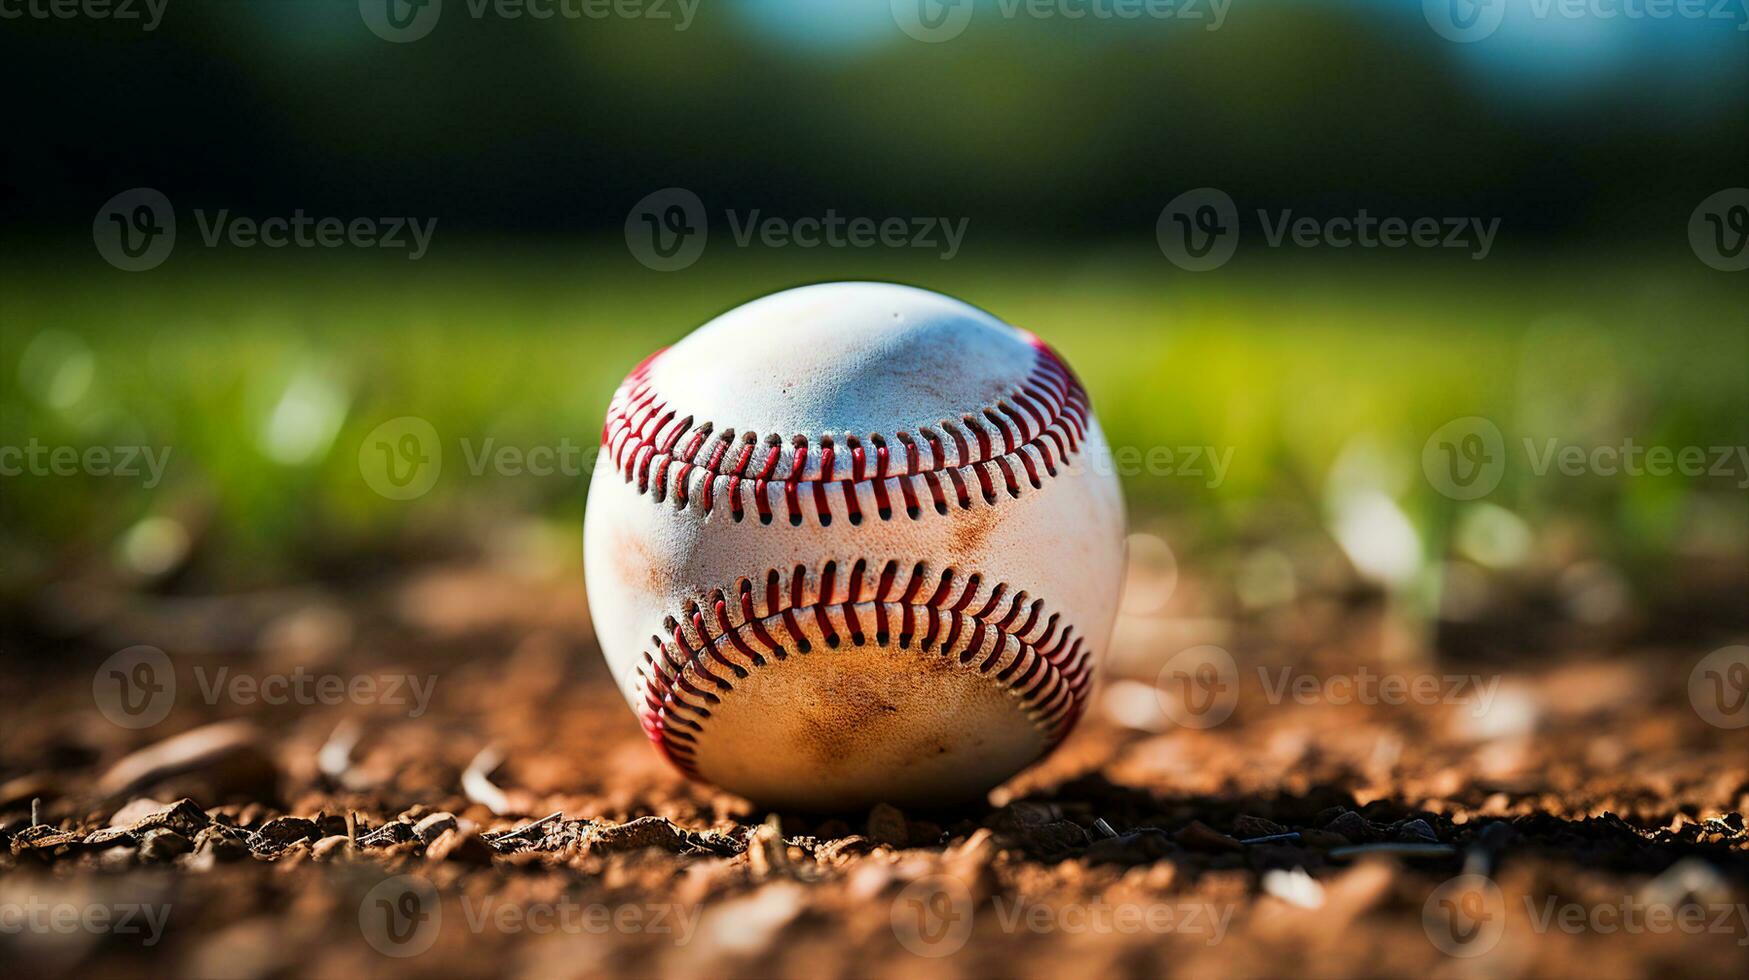 A close-up view of Baseball on Well-Maintained Infield Chalk Line in Outdoor Sports Field, Close-Up View with Rich Brown and White Contrast, Blured Background, AI-generated photo